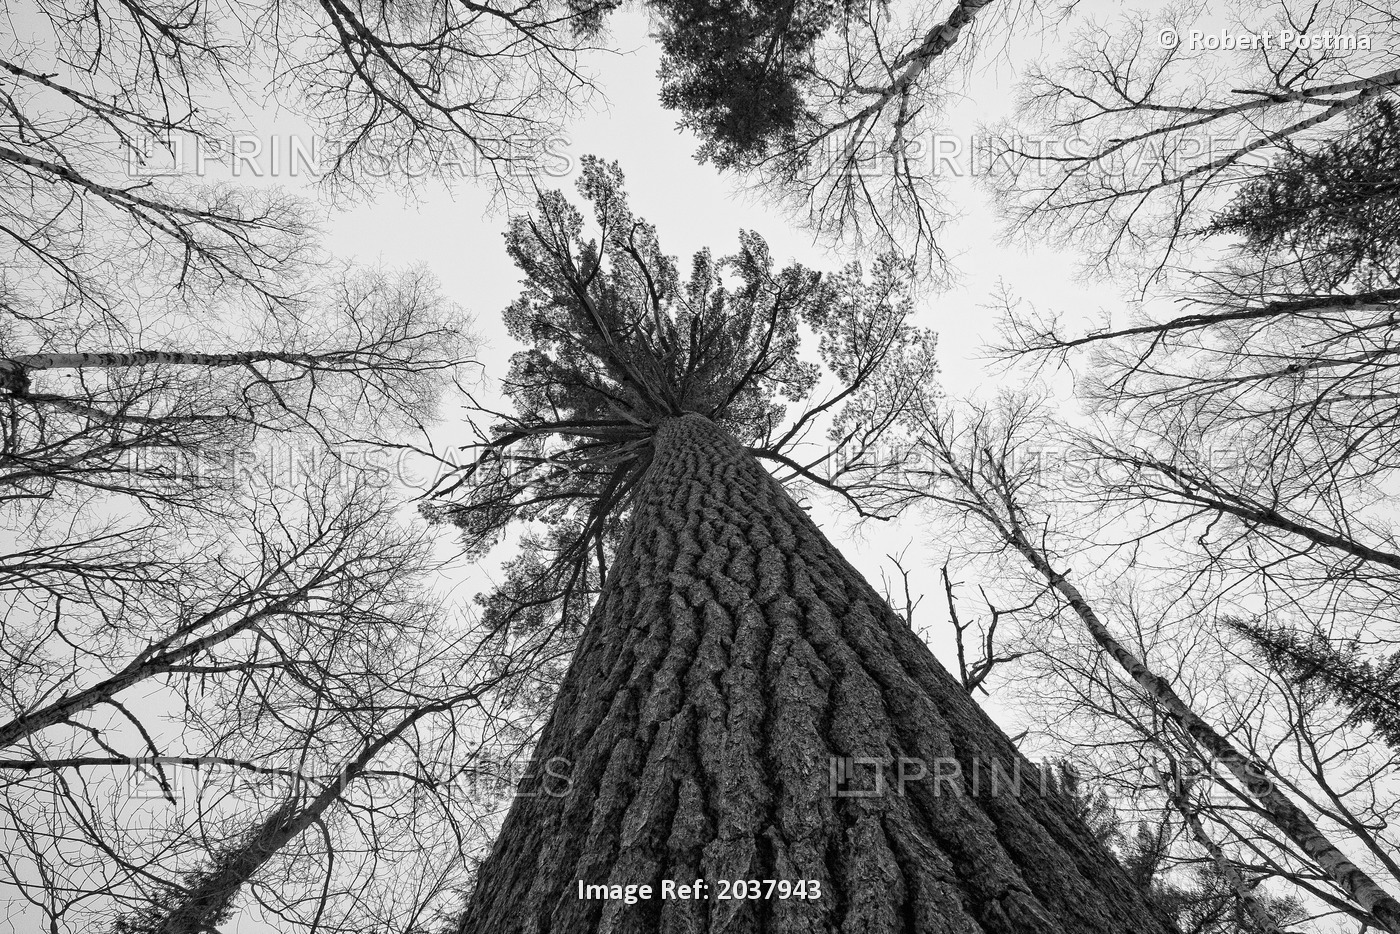 Black And White Image Of A Large White Pine In Algonquin Park, Ontario.